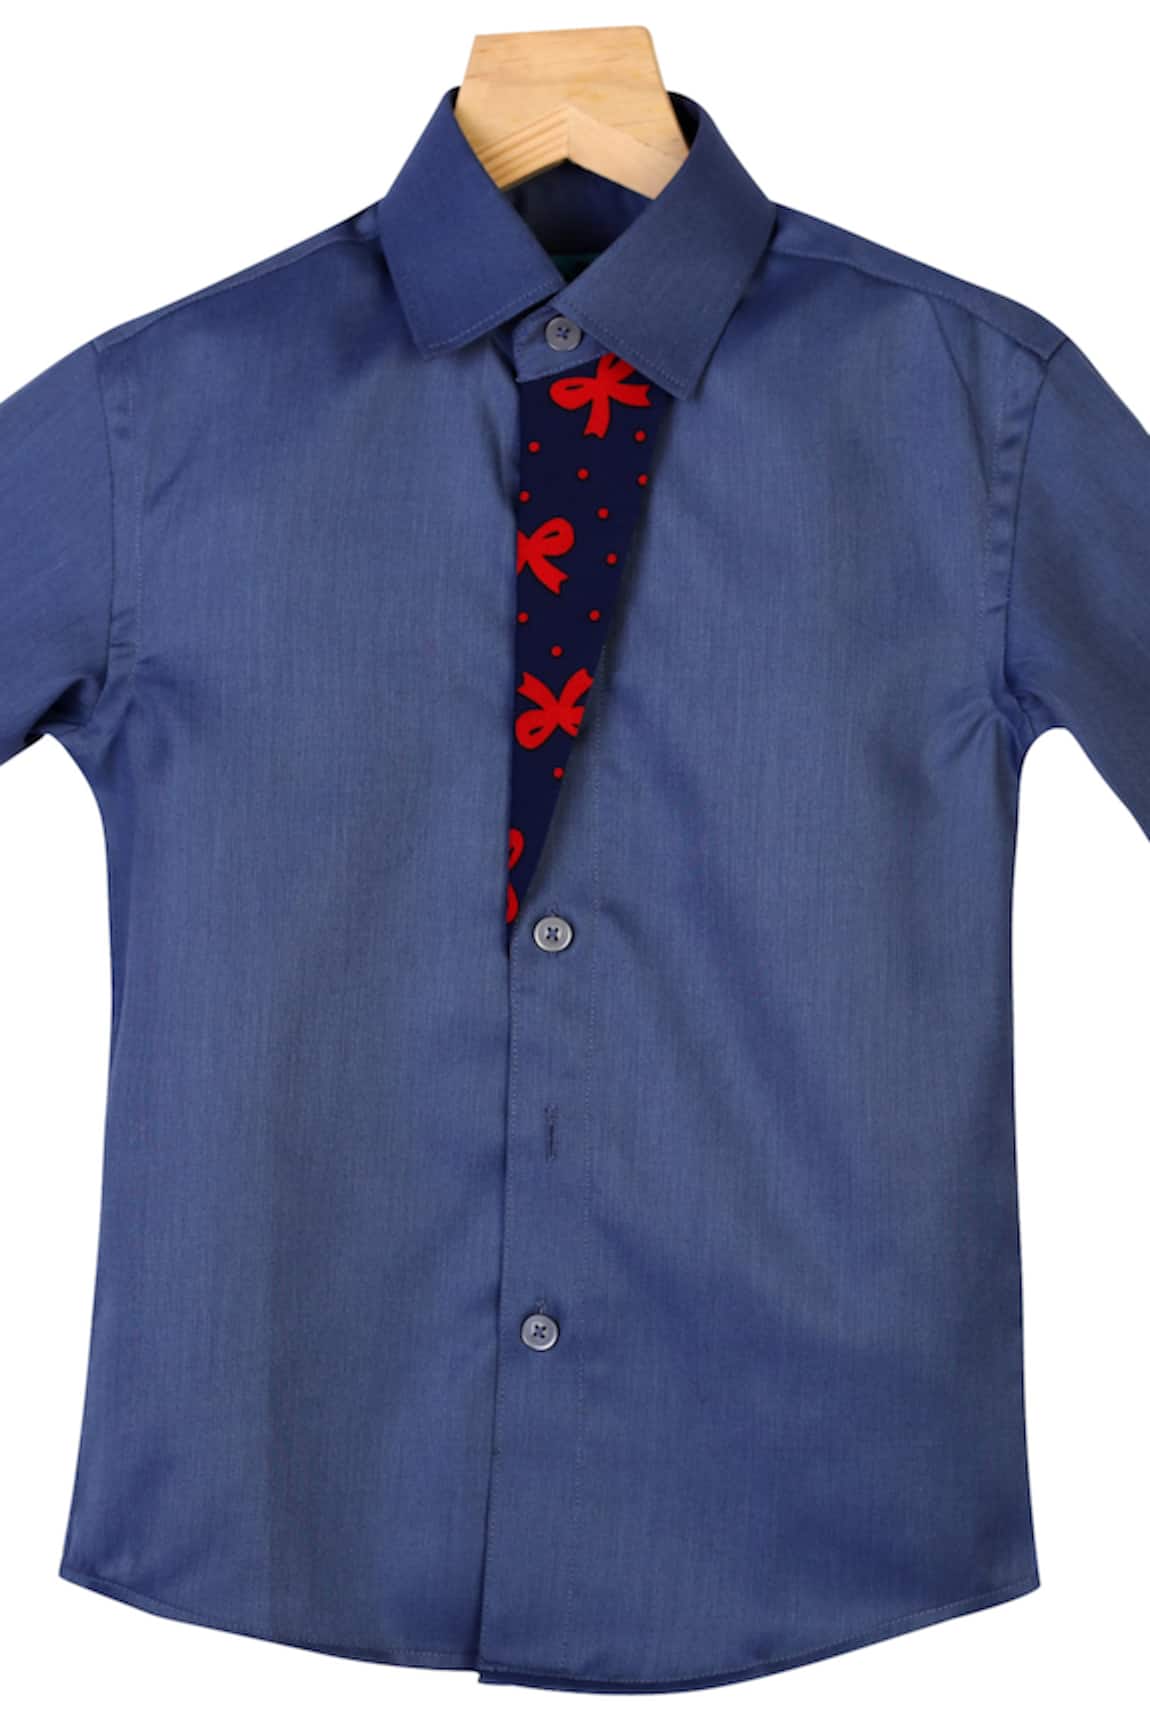 The Blue Morphology Bow Print Overflap Collared Shirt 